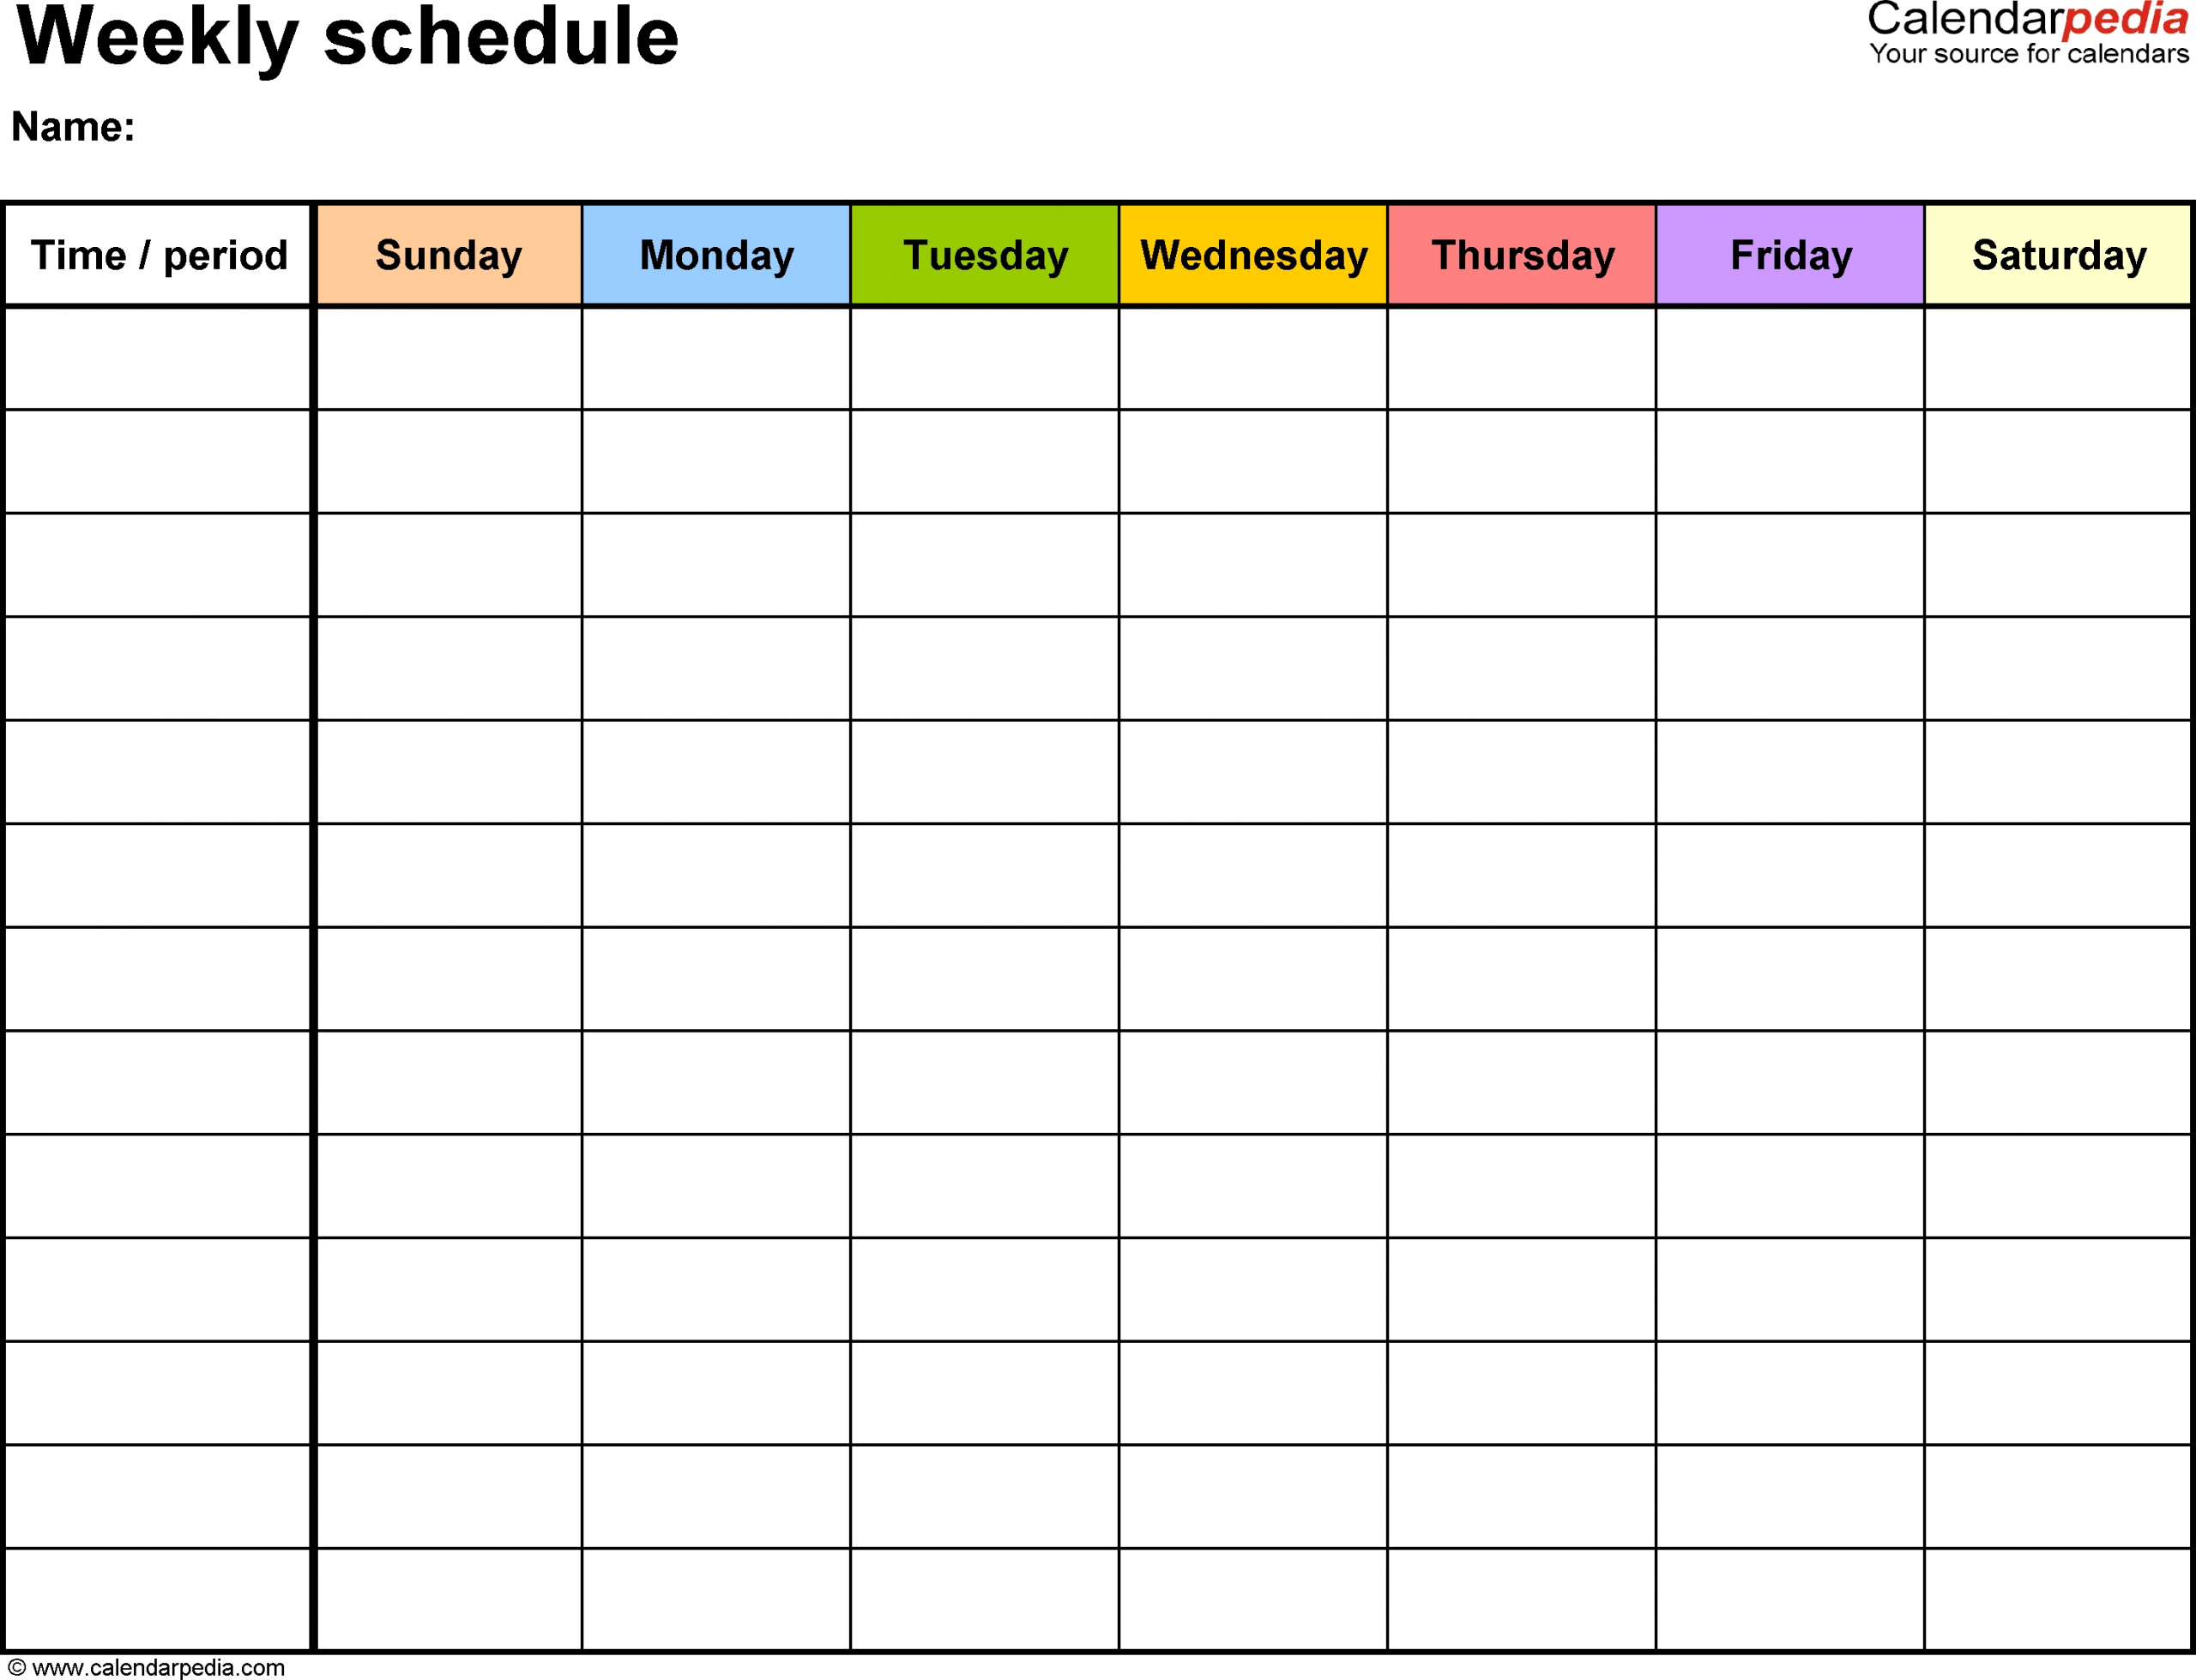 Free Weekly Schedule Templates For Word - 18 Templates with regard to Free Calendars Monday To Sunday